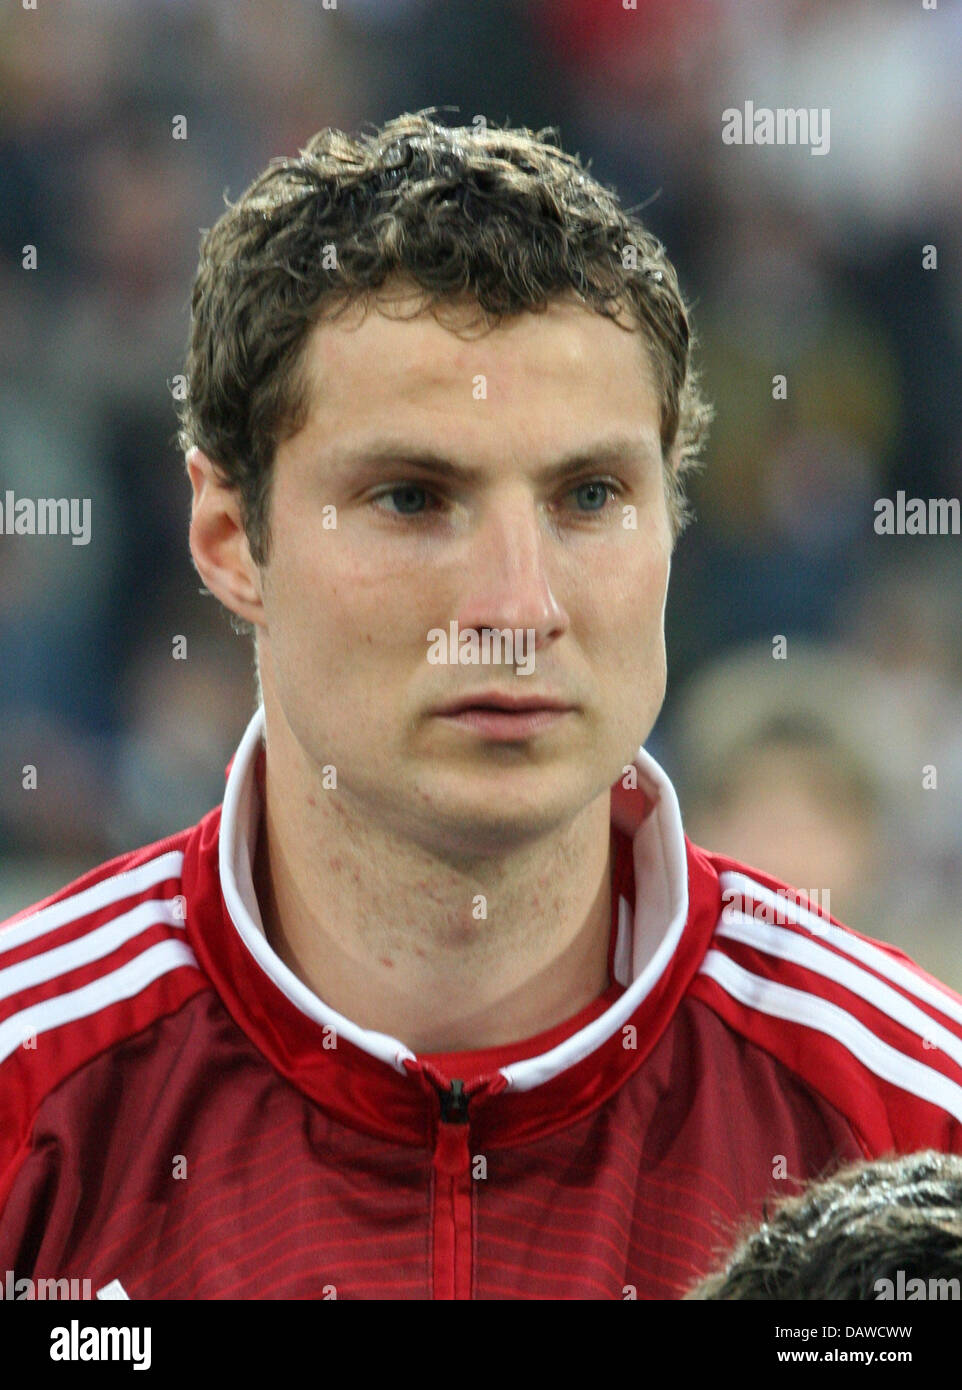 Danish international Brian Priske pictured before the test cap Germany v Denmark at the MSV Arena stadium of Duisburg, Germany, Wednesday, 28 March 2007. Denmark defeated Germany 0-1. Photo: Franz-Peter Tschauner Stock Photo